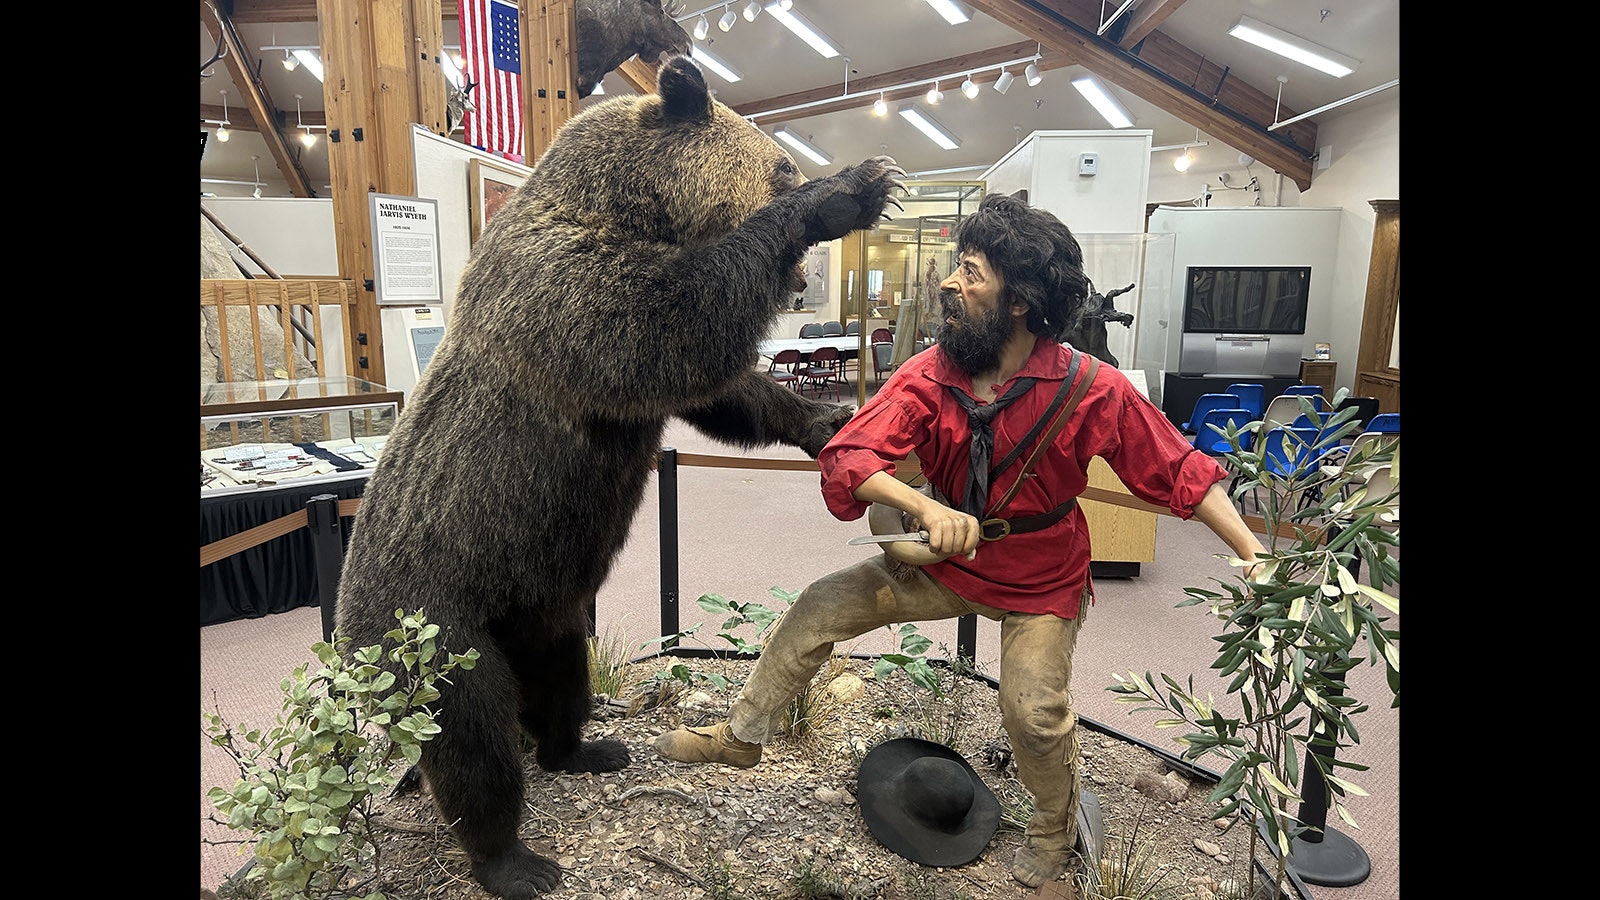 Another angle of the encounter between mountain man Hugh Glass and a grizzly sow that happened in South Dakota in the early 1820s. In the background is the Museum of the Mountain Man collection of commemorative Winchester rifles.